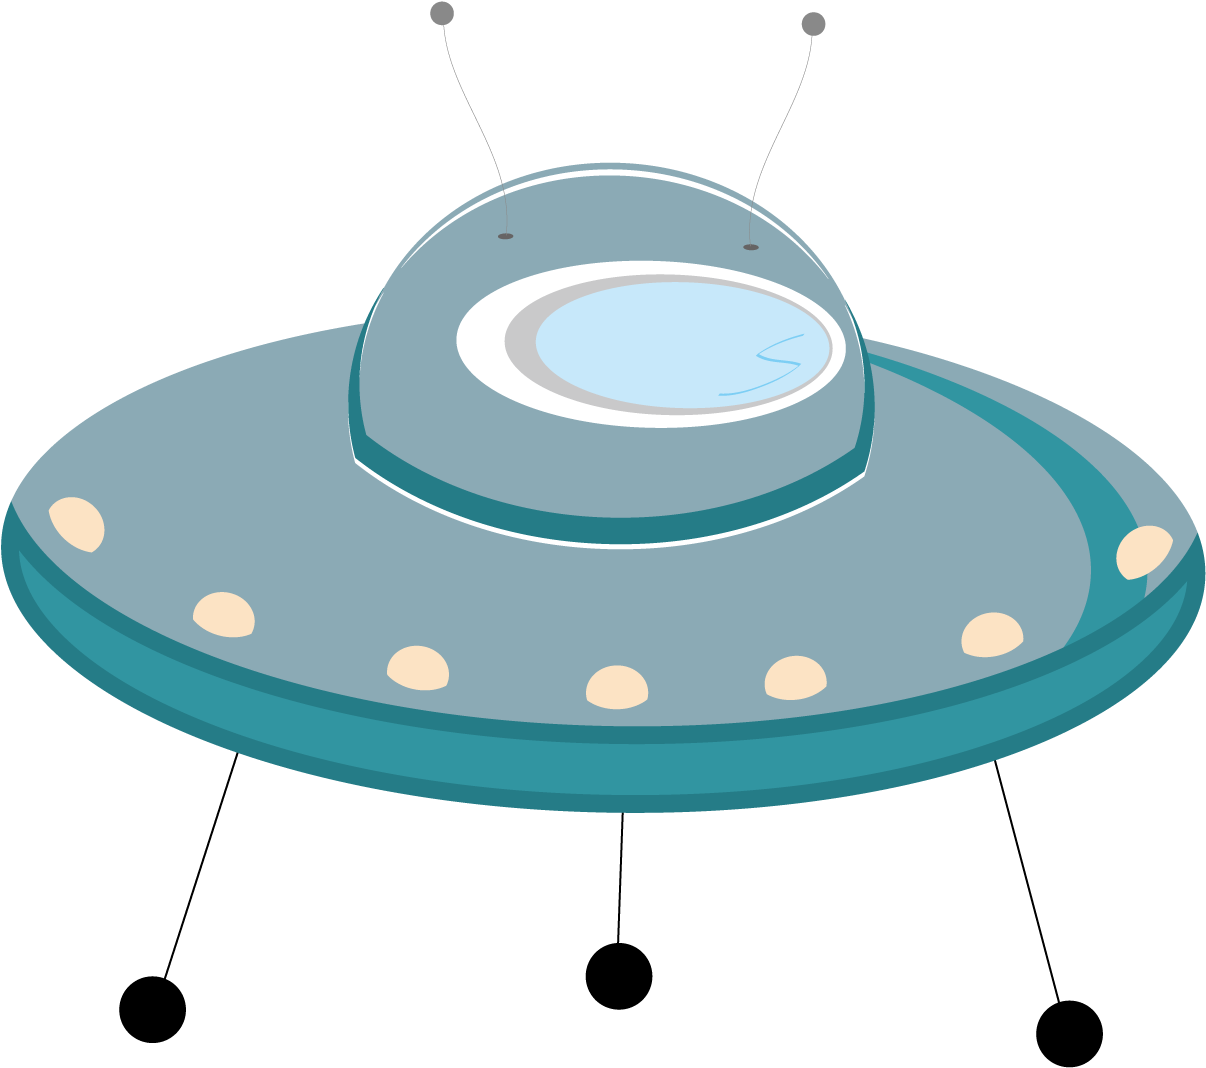 Flying Saucer Unidentified Flying Object Cartoon Clip - Ufo Vector (1500x1500)